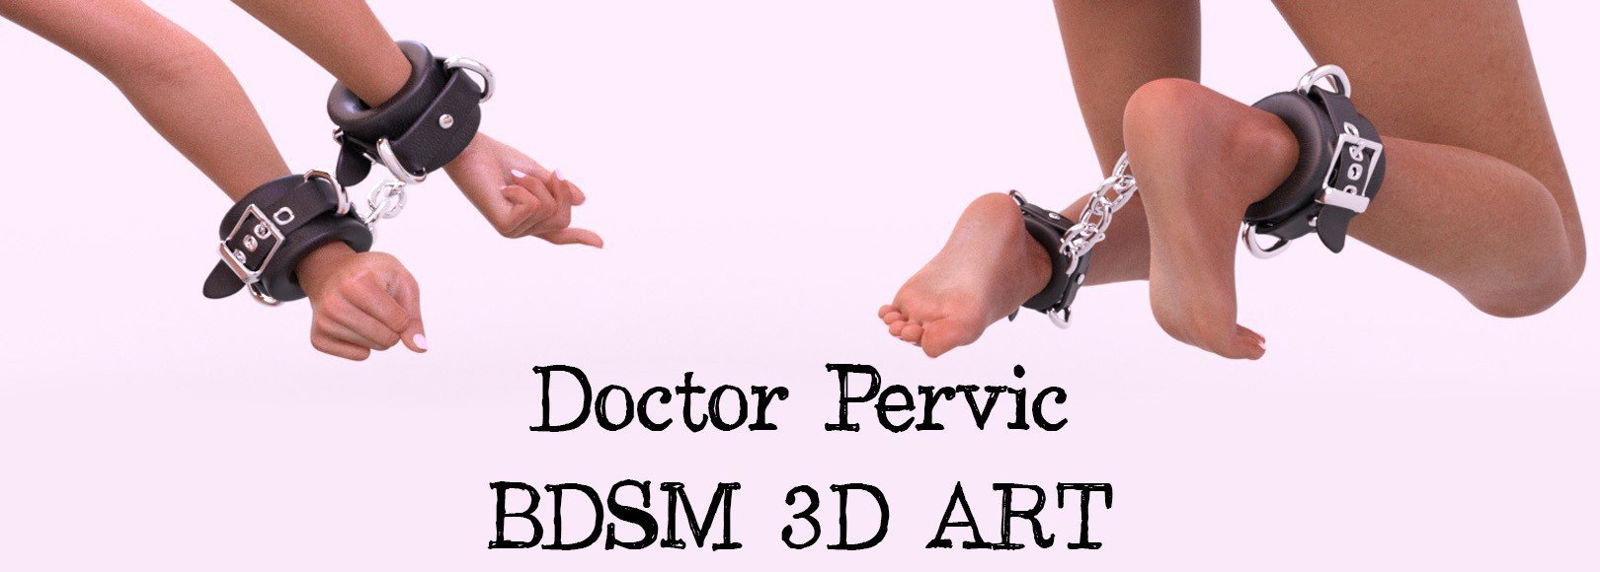 Cover photo of Doctor Pervic